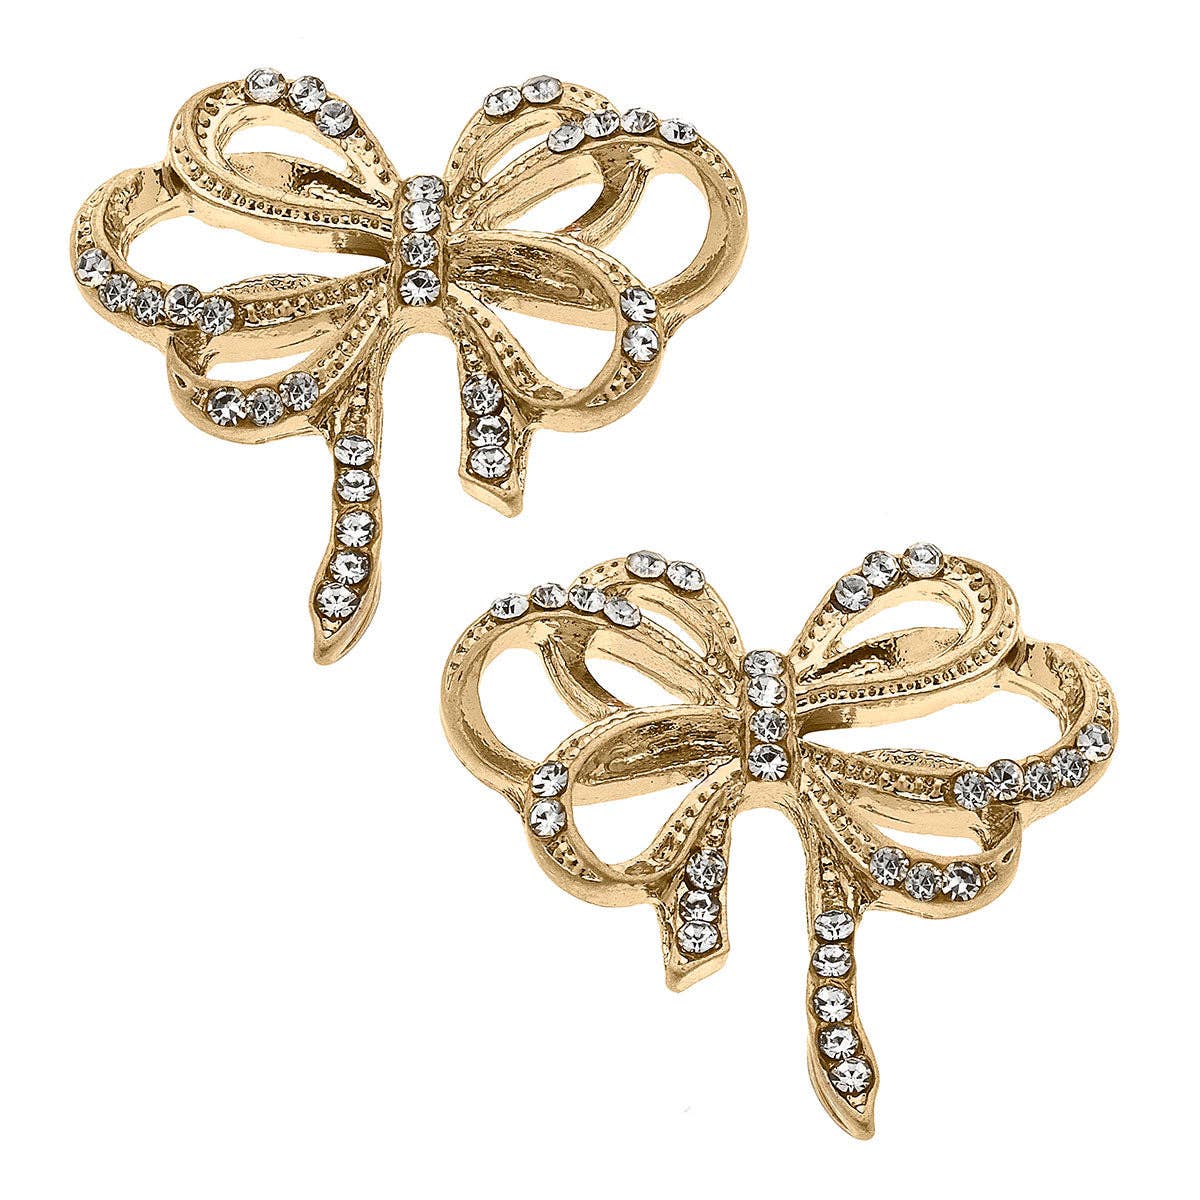 Carina Pavé Bow Stud Earrings in Worn Gold